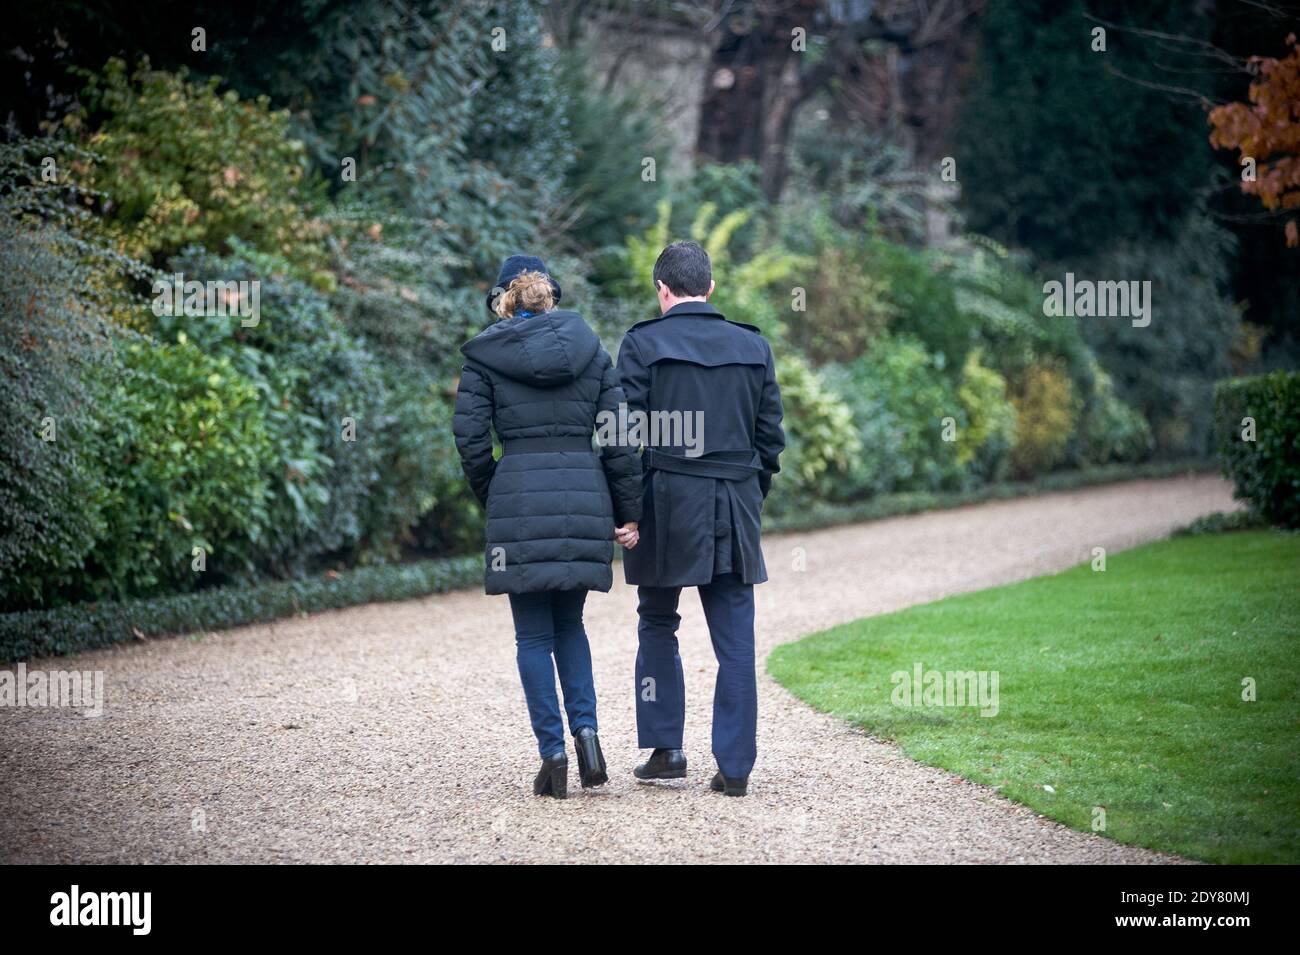 French Prime Minister Manuel Valls along with his wife Anne Gravoin leaves after planting the tree called 'of the Prime Minister' - as is the republican tradition - in the gardens of his headquarters Hotel de Matignon in Paris, France on December 16, 2014. The tree, chosen by the Prime Minister, is an oak of the species 'Quercus robur fastigiata' and is located on the front lawn. The tradition of planting a tree at the PM's headquarters was introduced by the late Prime Minister Raymond Barre in 1978. Photo Pool by Nicolas Messyasz/ABACAPRESS.COM Stock Photo